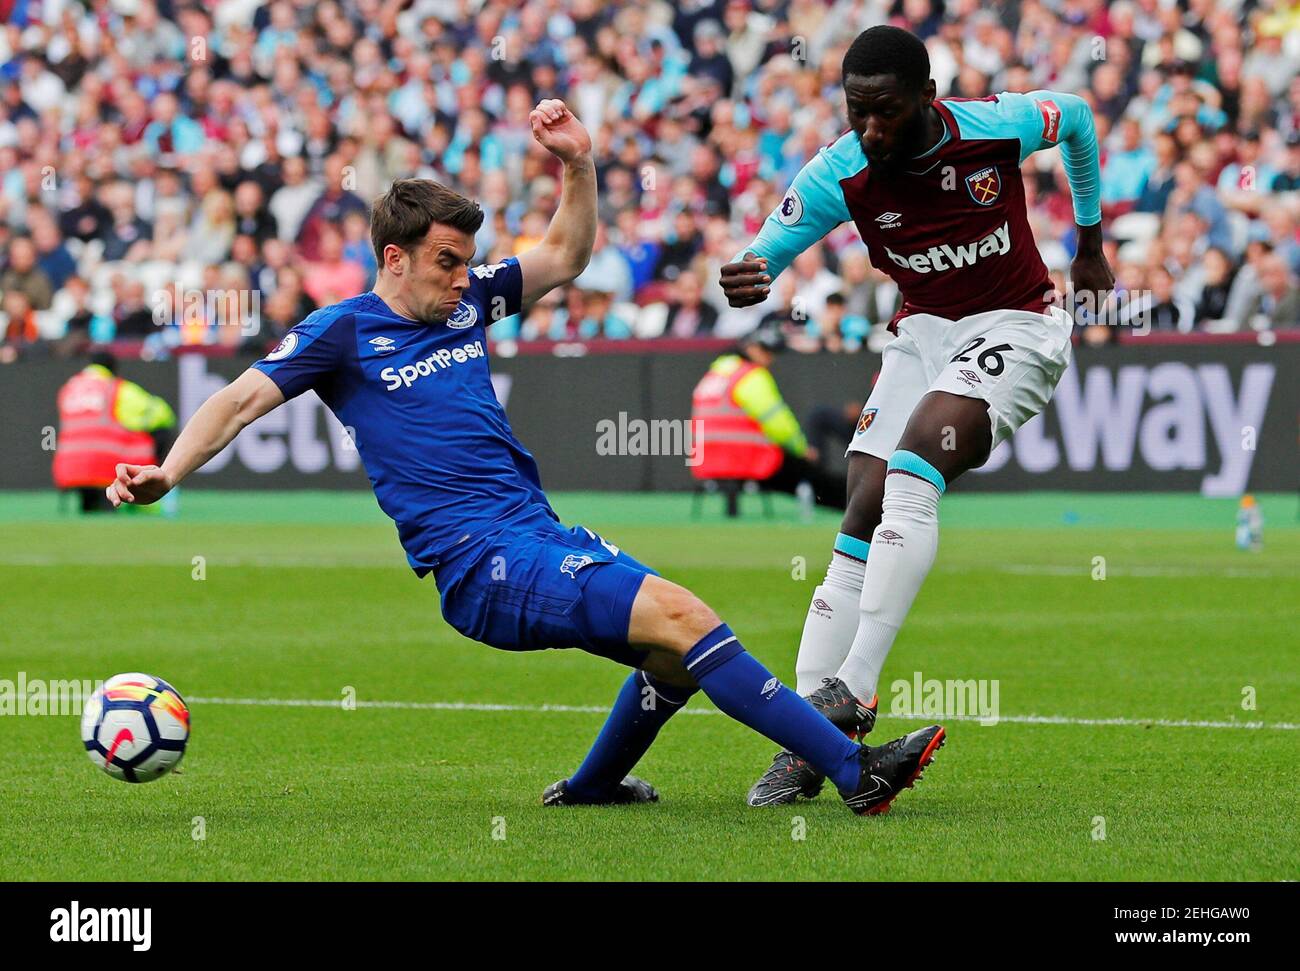 Soccer Football - Premier League - West Ham United vs Everton - London Stadium, London, Britain - May 13, 2018   Everton's Seamus Coleman in action with West Ham United's Arthur Masuaku    REUTERS/Eddie Keogh    EDITORIAL USE ONLY. No use with unauthorized audio, video, data, fixture lists, club/league logos or 'live' services. Online in-match use limited to 75 images, no video emulation. No use in betting, games or single club/league/player publications.  Please contact your account representative for further details. Stock Photo